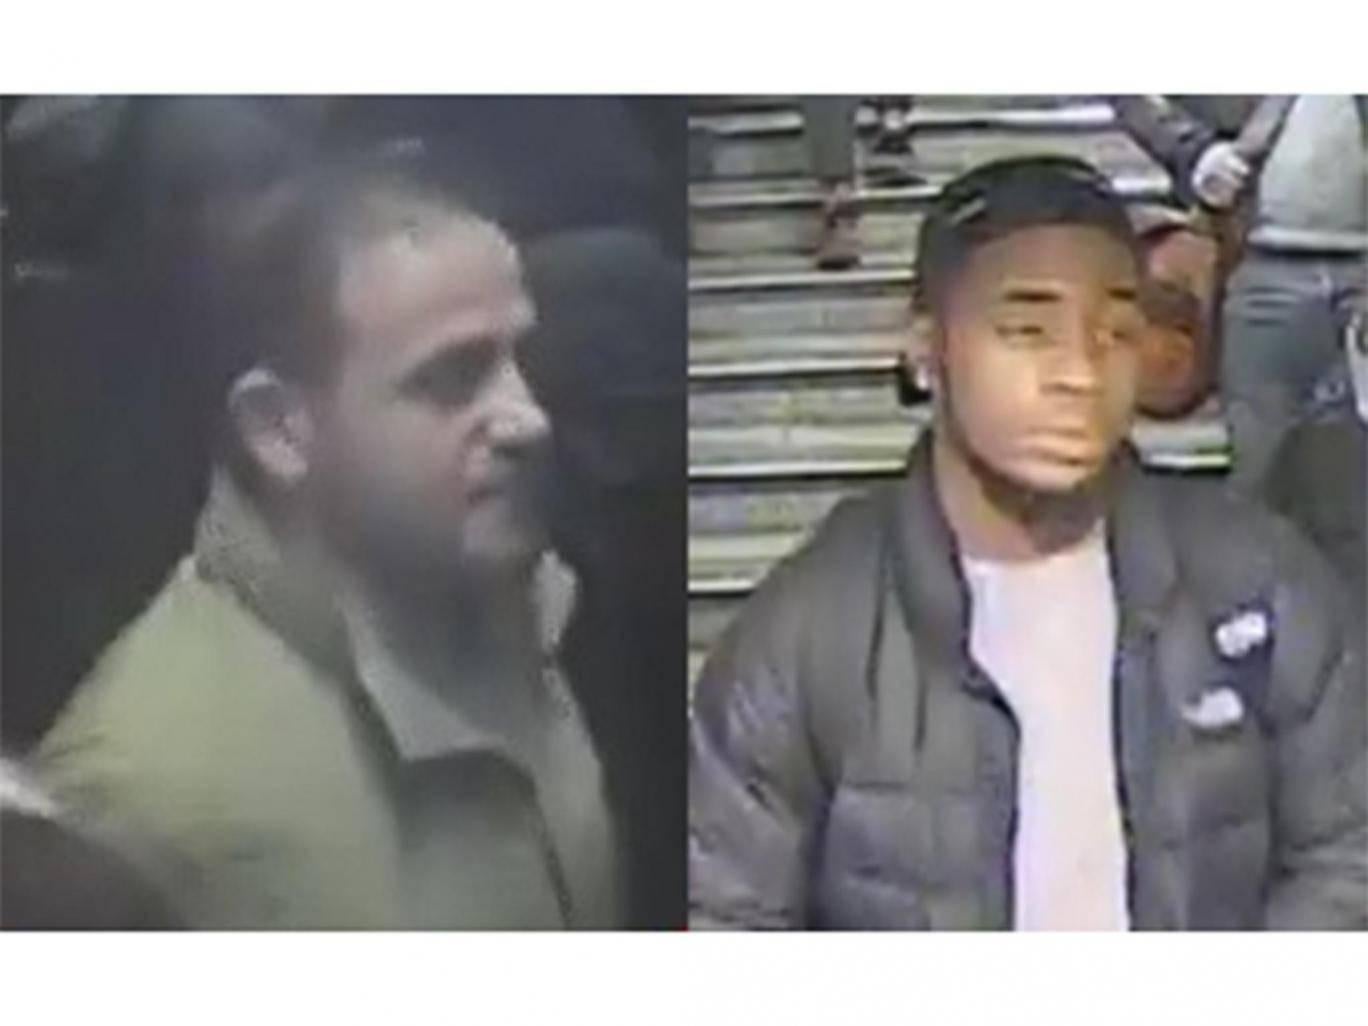 The Metropolitan Police have asked anyone with information to come forward